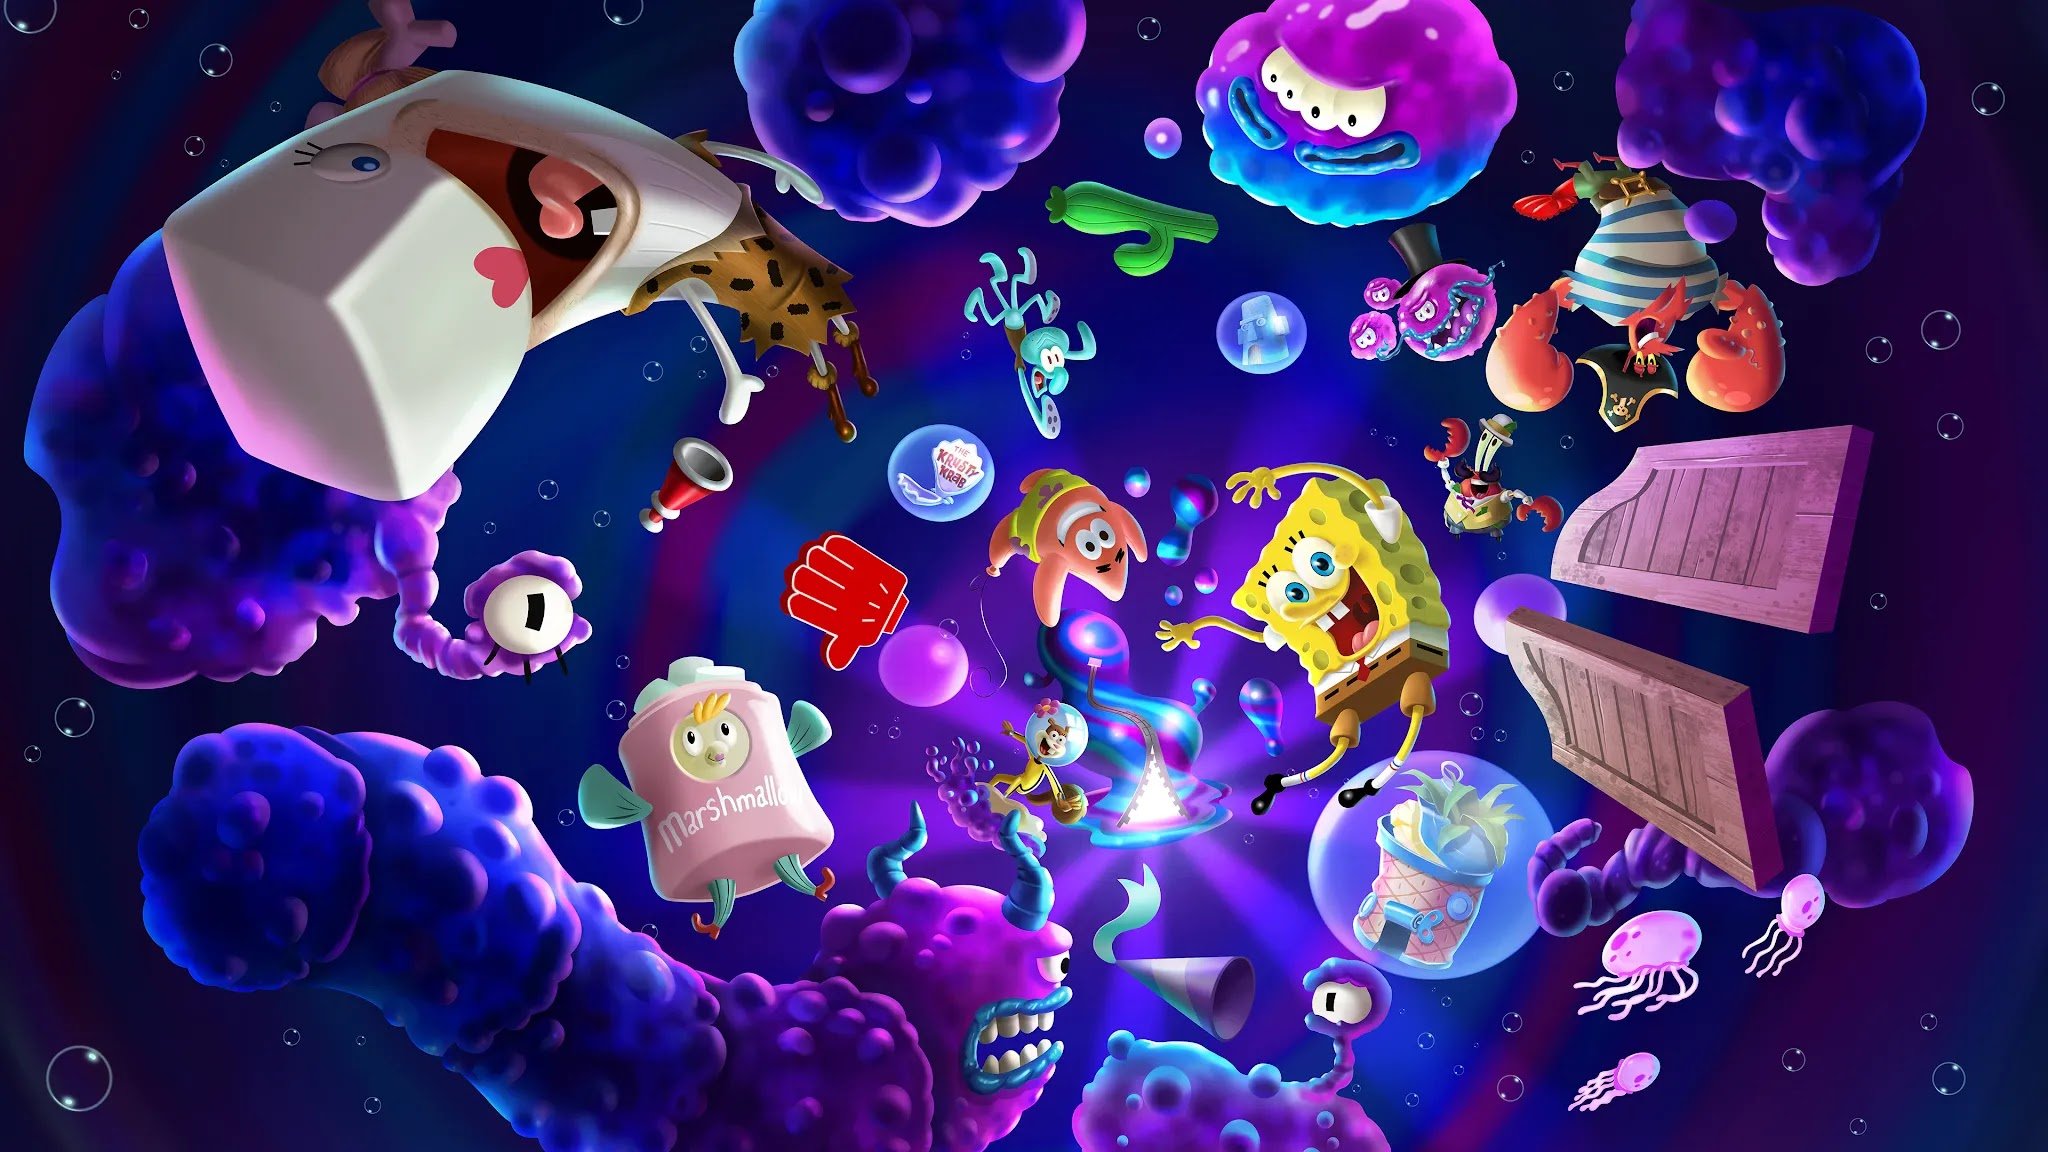 NickALive!: THQ Nordic to Showcase 'SpongeBob SquarePants: The Cosmic Shake' During Save The Date 2022 Event